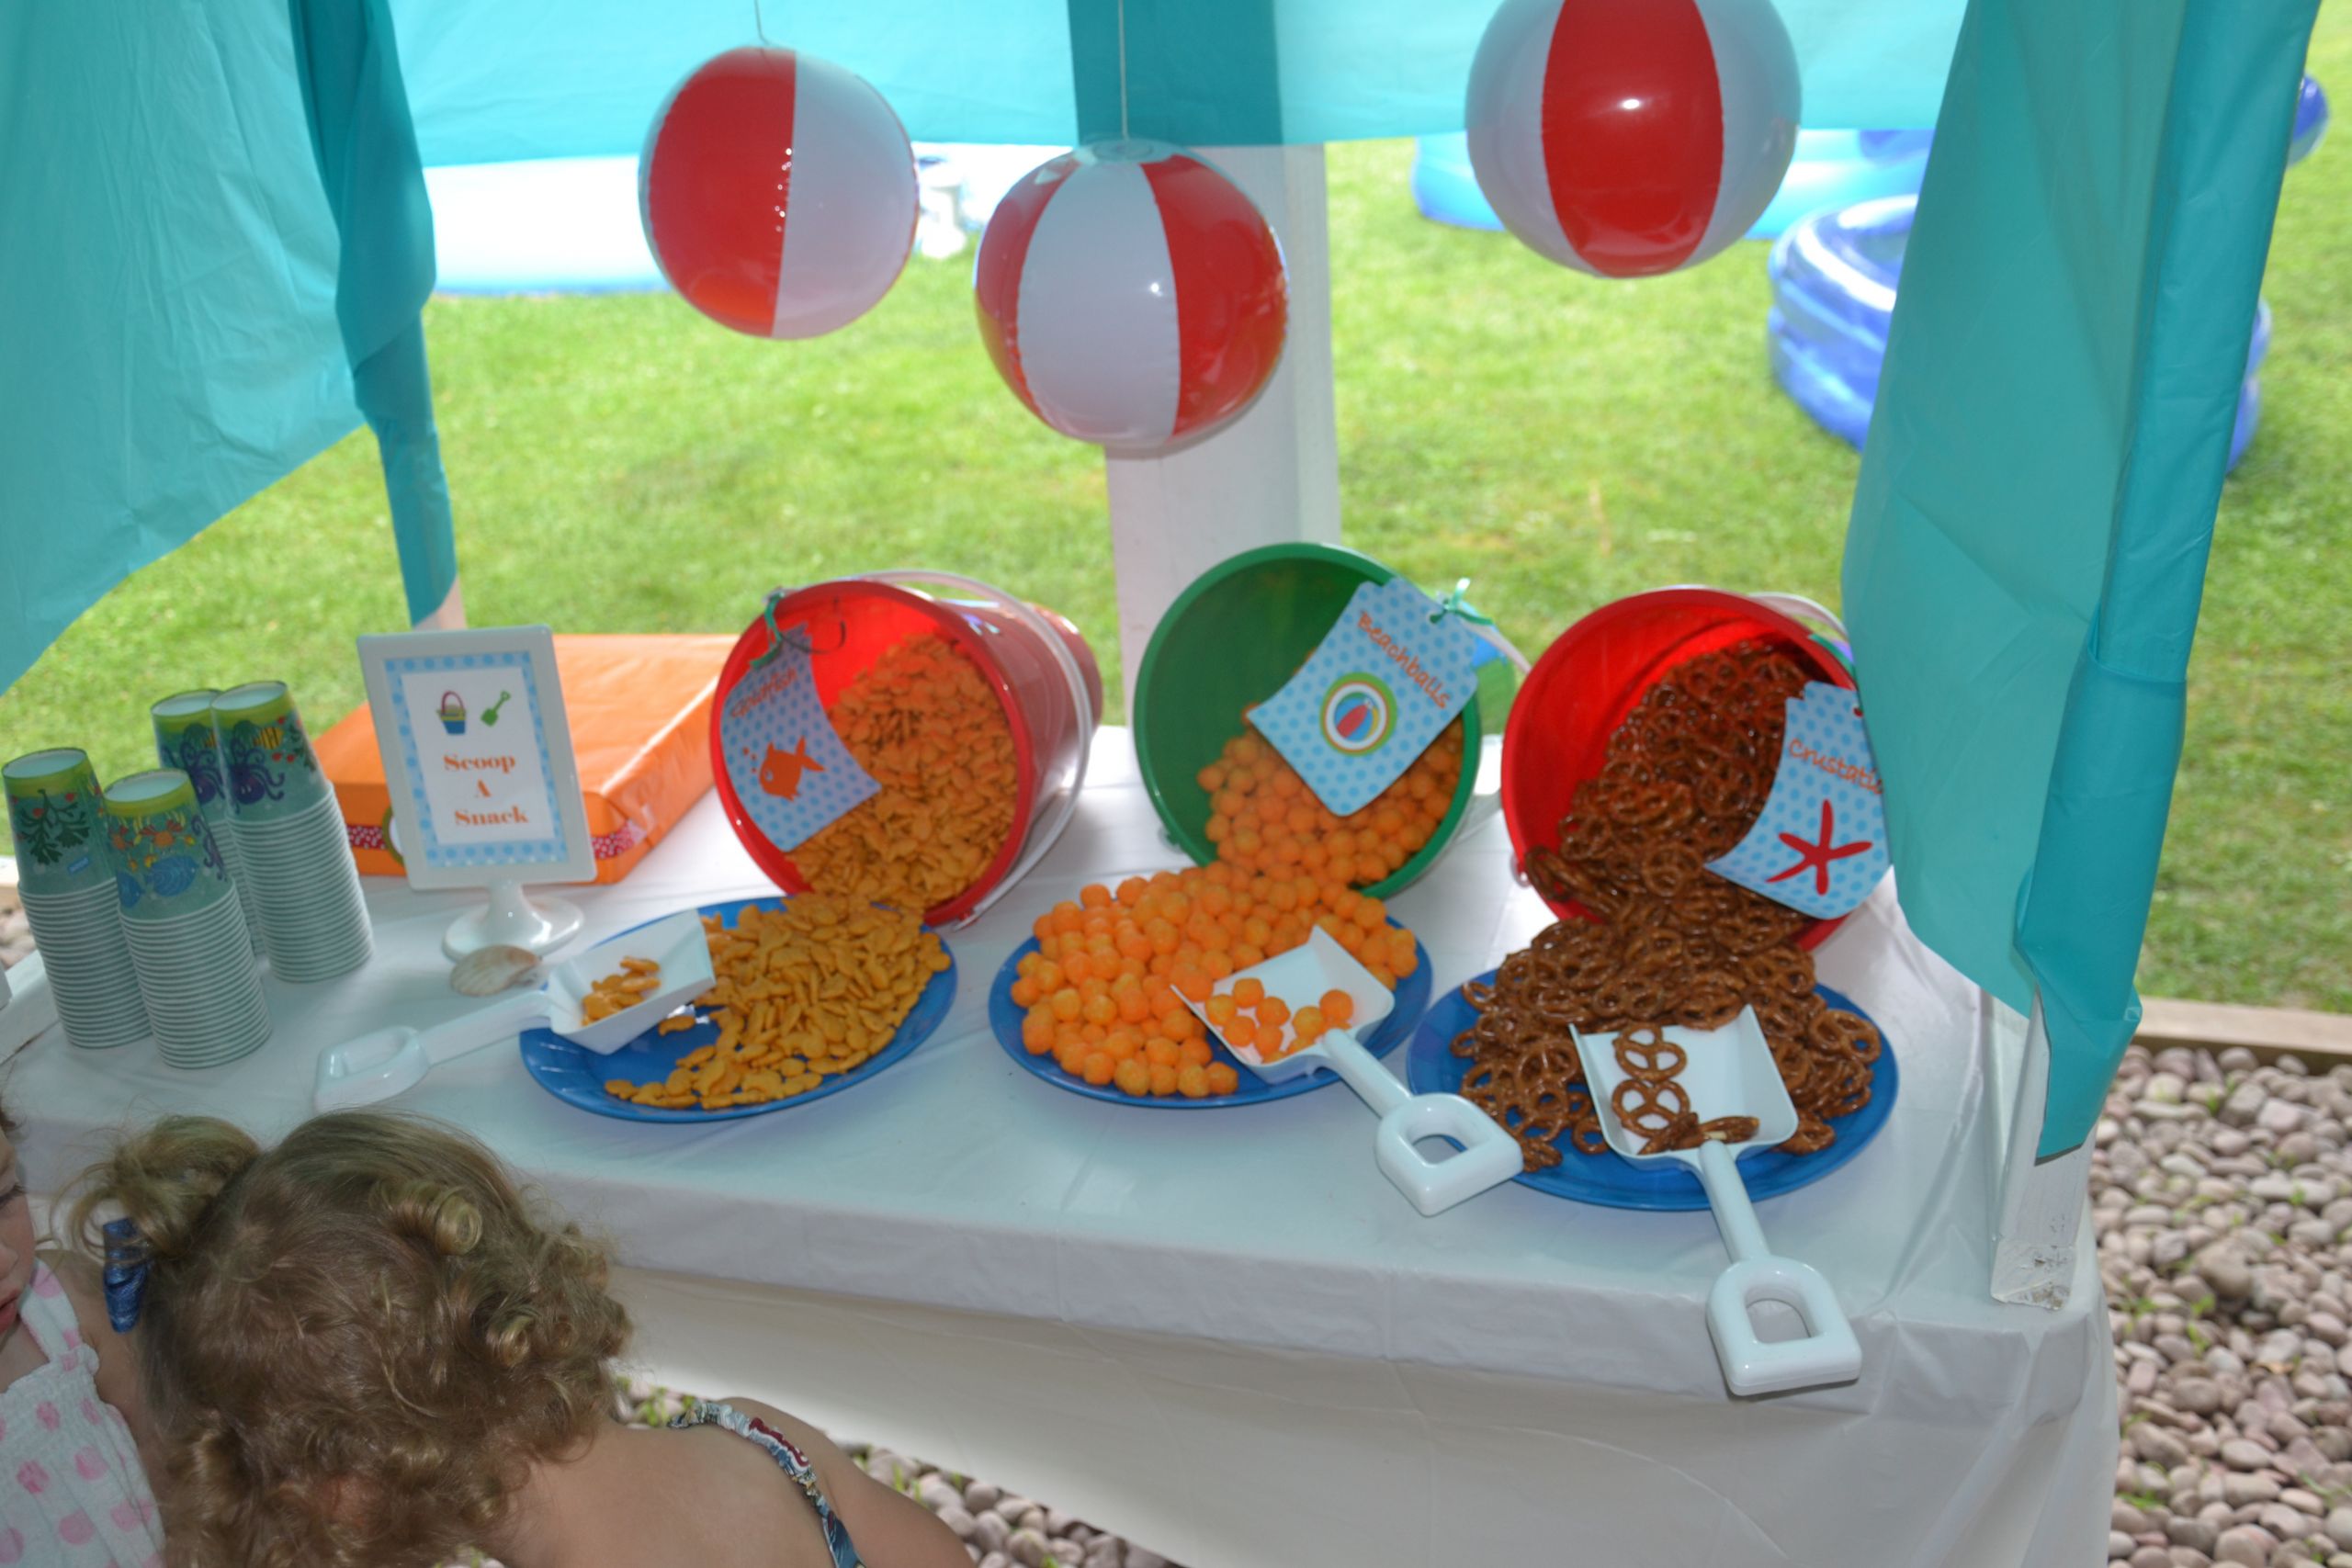 Kids Beach Party Food Ideas
 Party on a Bud  Ideas for Serving Summer Snacks